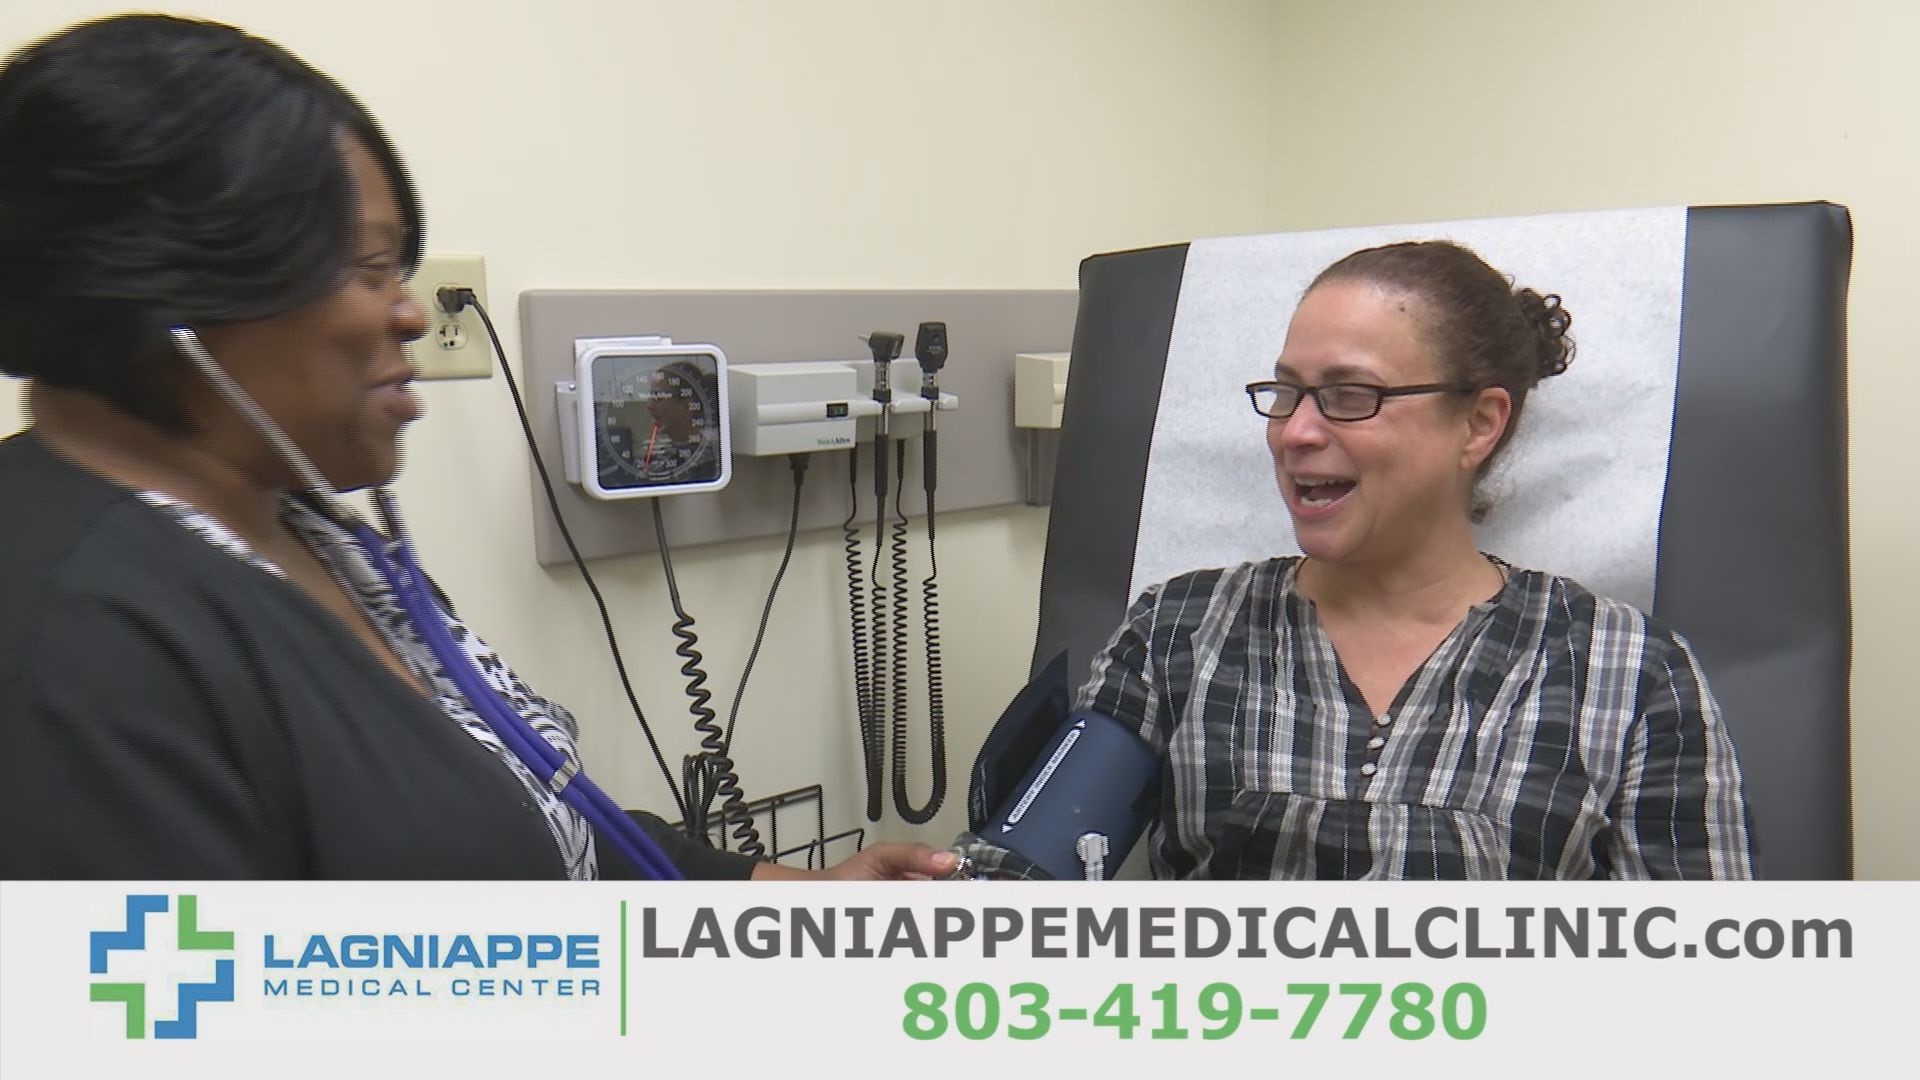 Lagniappe Medical Clinics provides "a little something extra" to their patients. With their Direct Primary Care, you can pay a nominal pre-pay monthly fee and receive immunizations, basic labs and imaging, unlimited visits, and more!